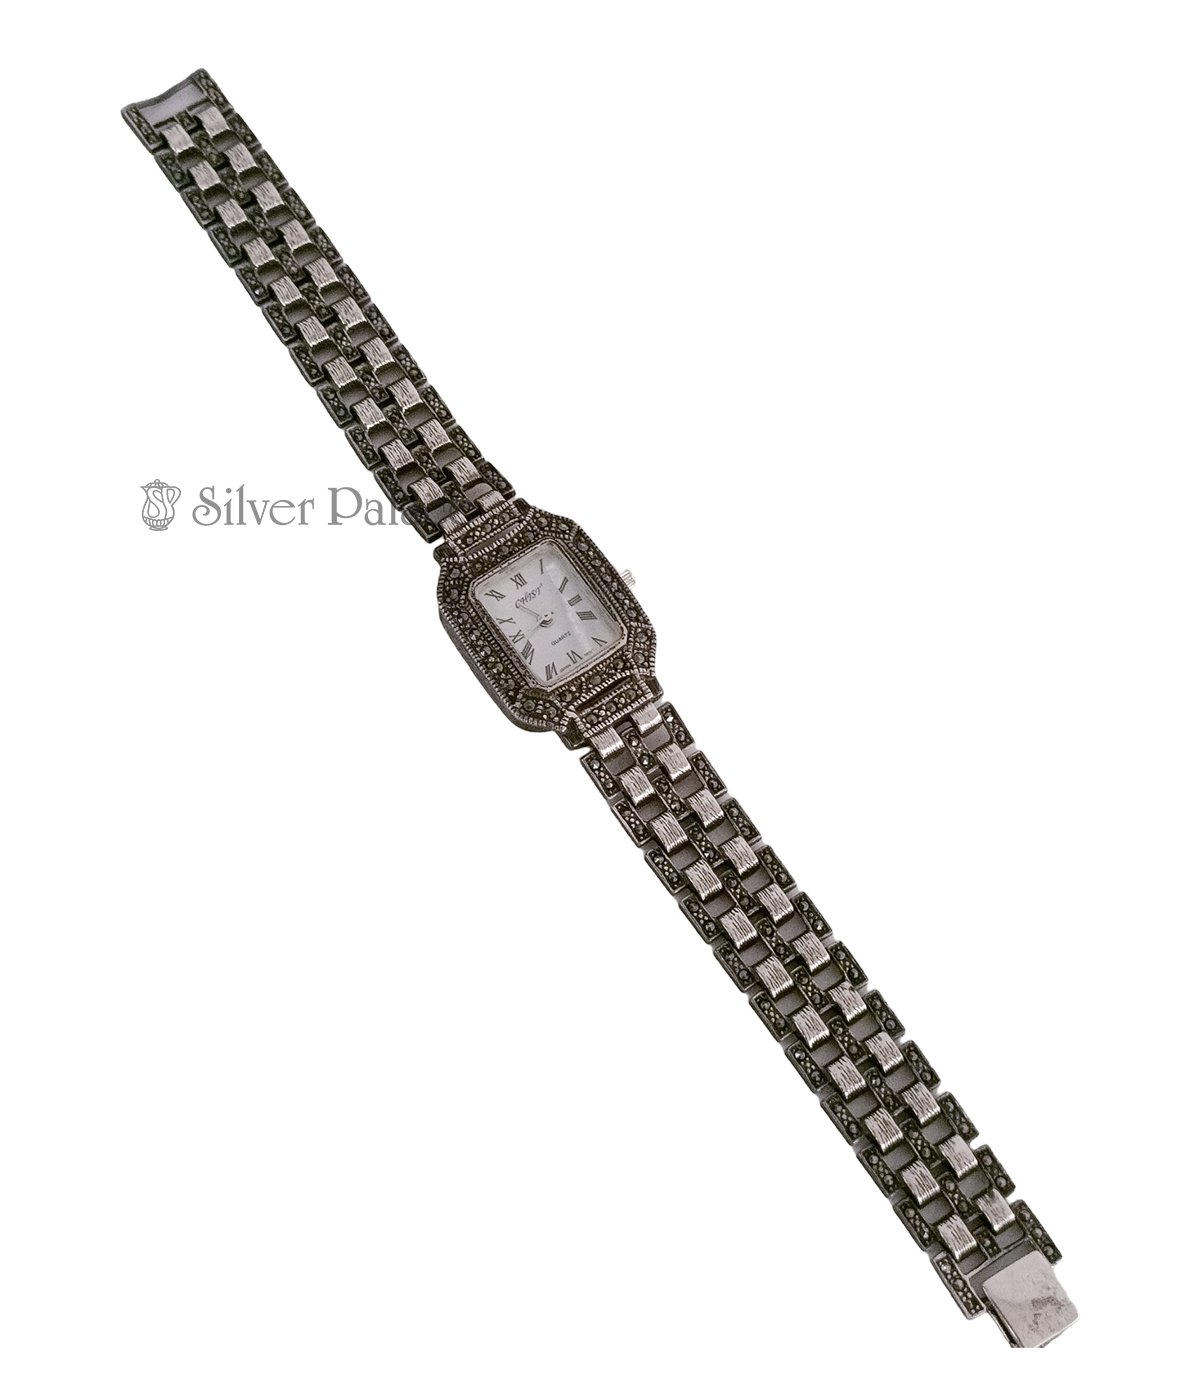 OXIDISED SILVER MARCASITE STONE WATCH 92.5 PURITY